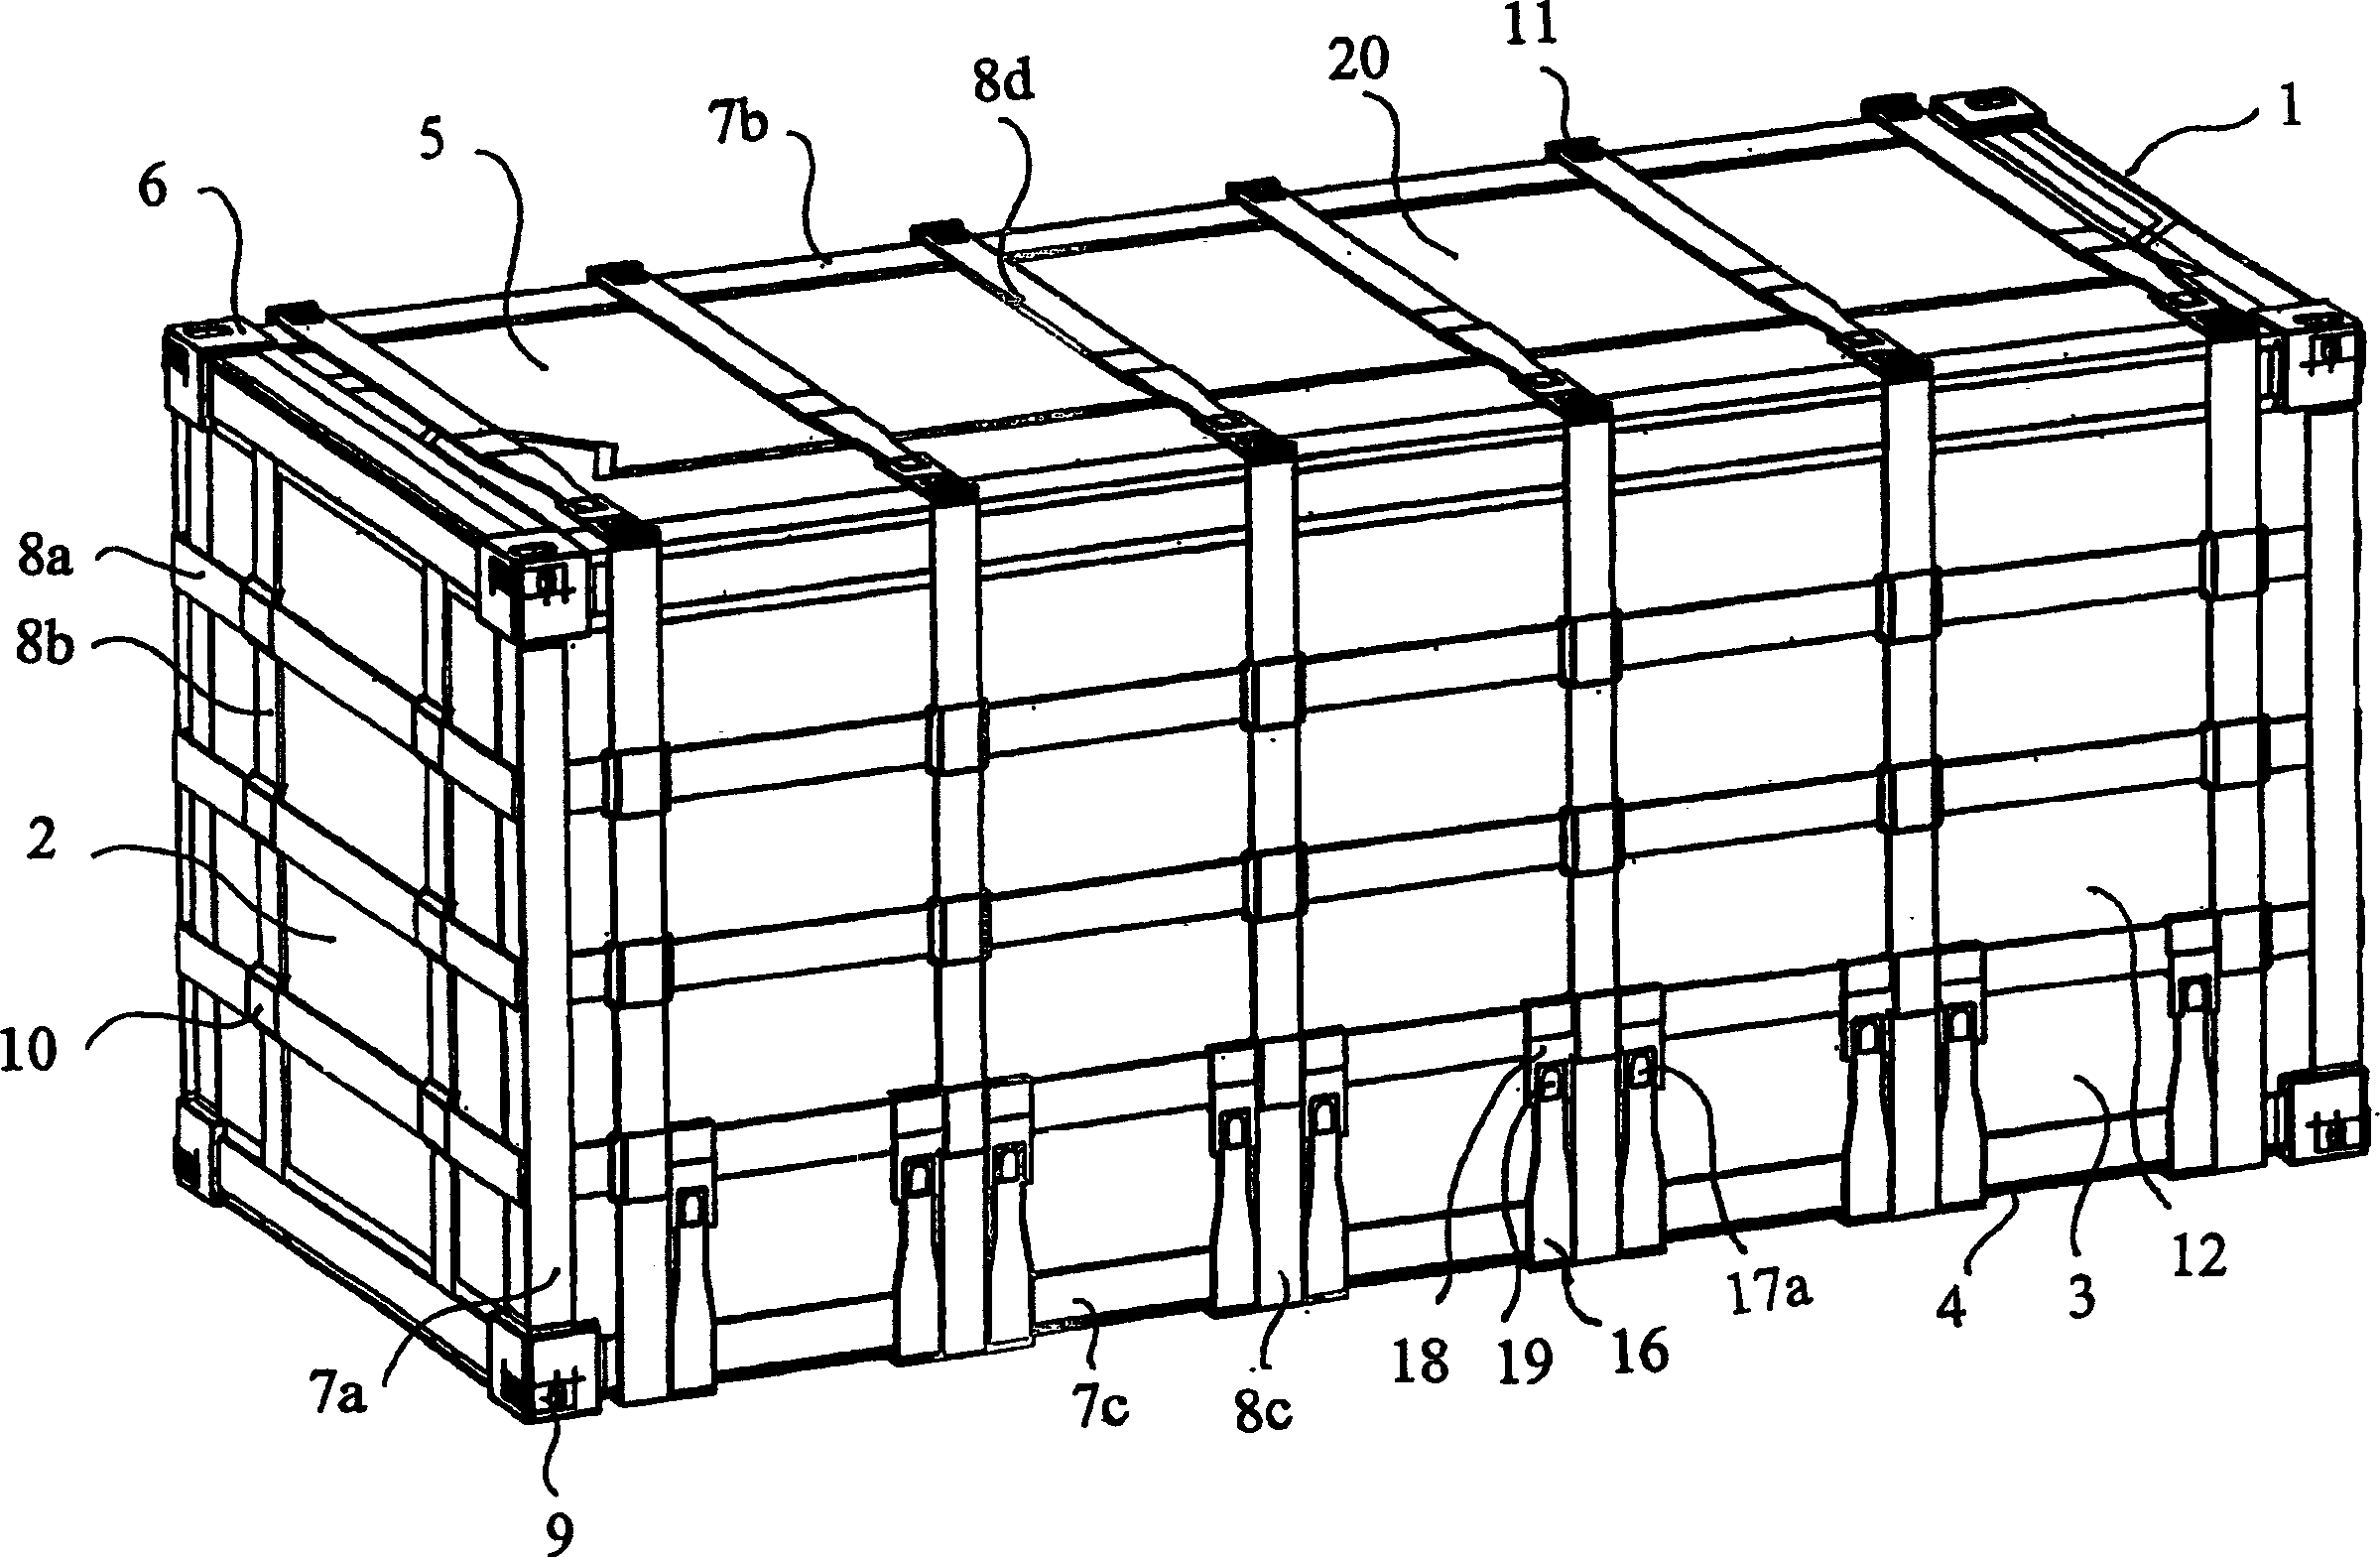 Transportation container